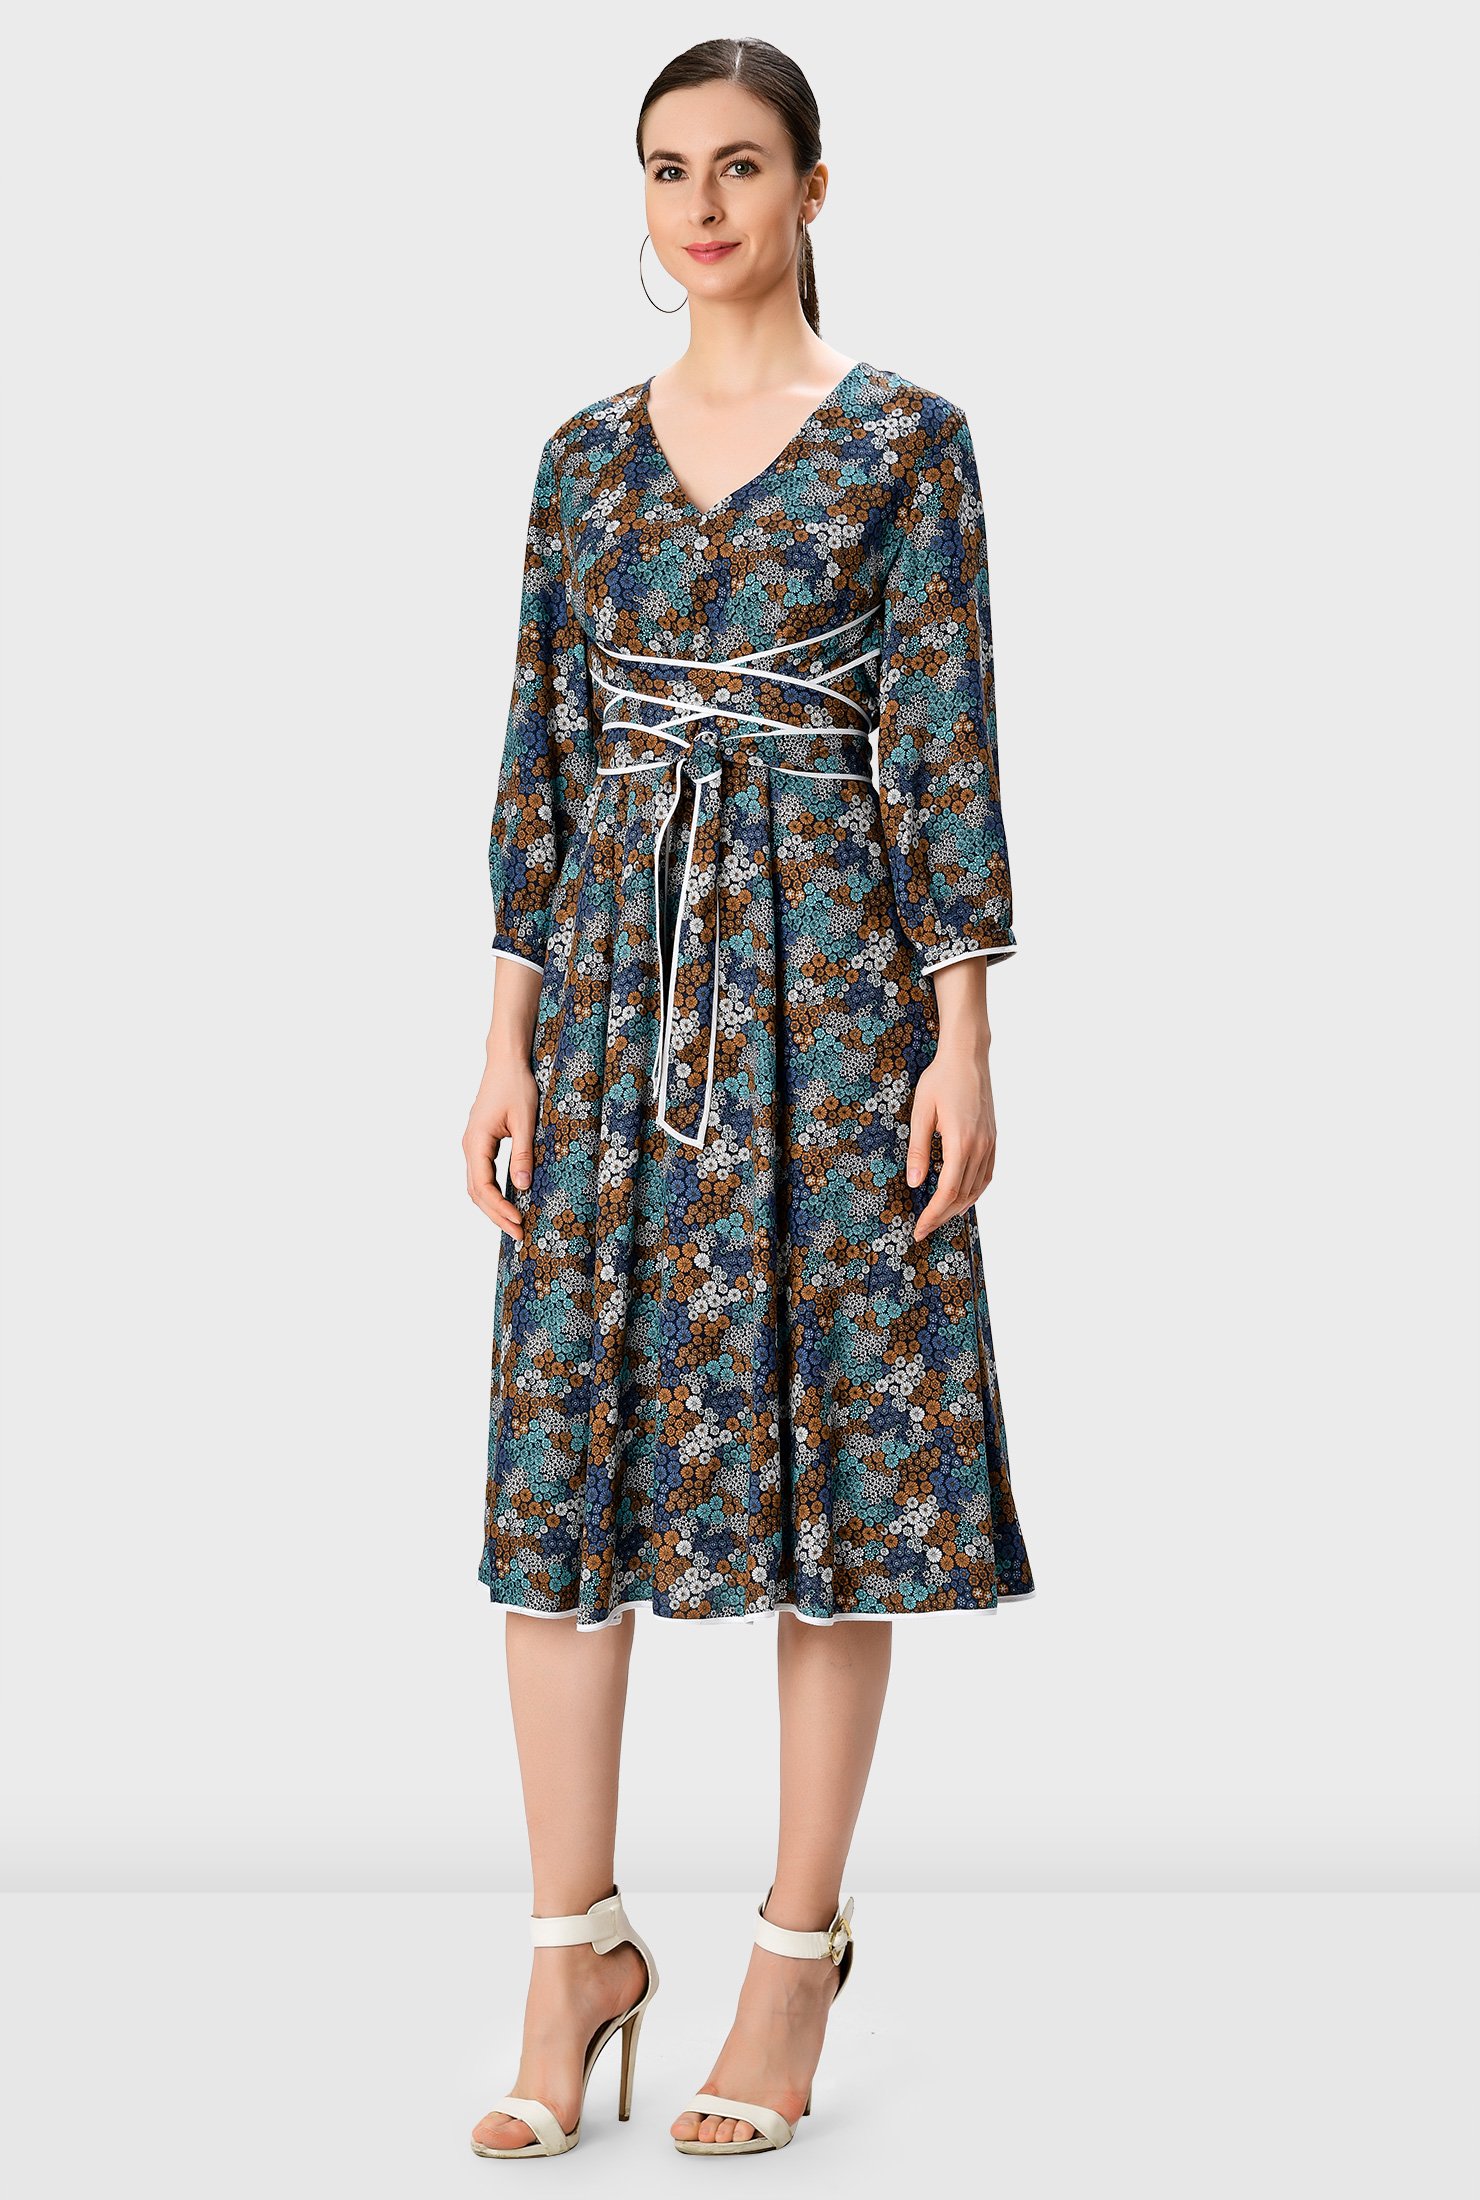 Our floral print dress is styled with attached sash ties with contrast tipped trim that wrap around the waist for a flattering finish.